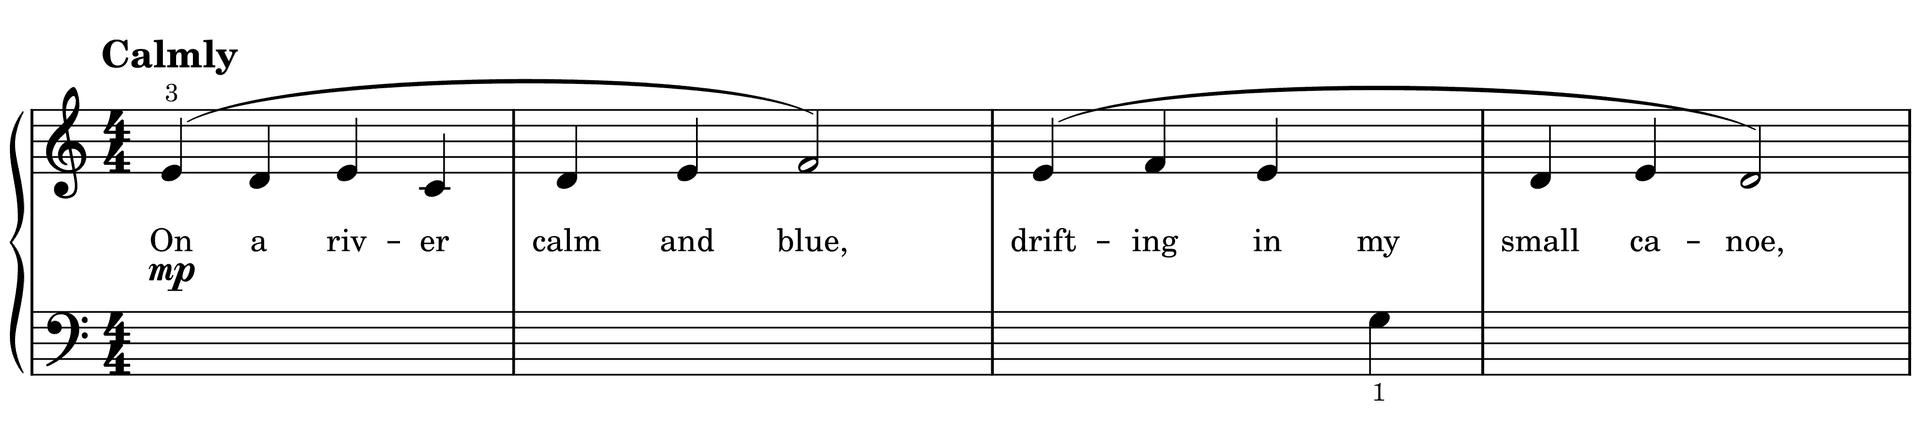 Excerpt of Drifting on a Calm River 